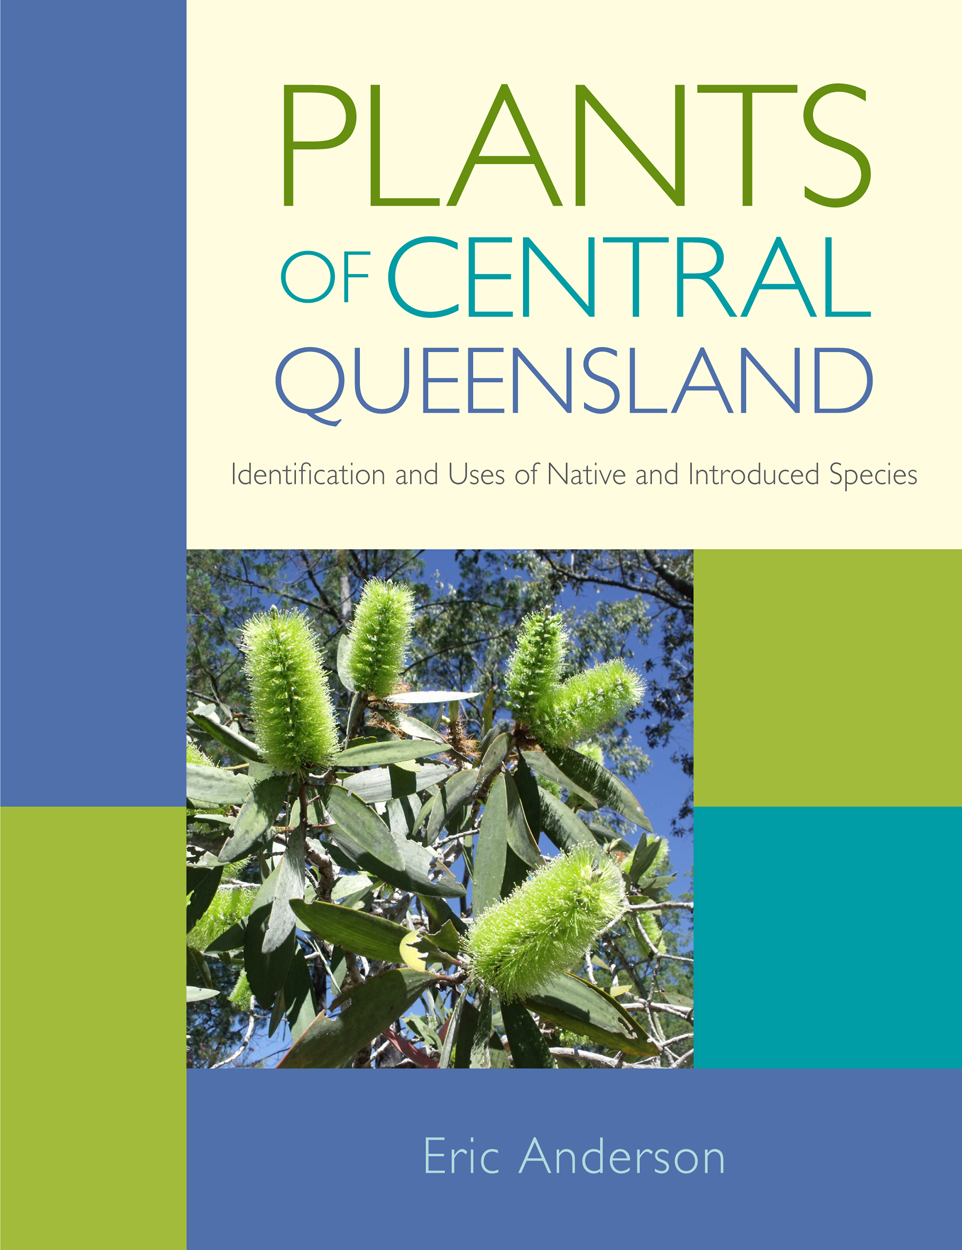 Cover featuring a photo of green broad-leaved teatree flowers.